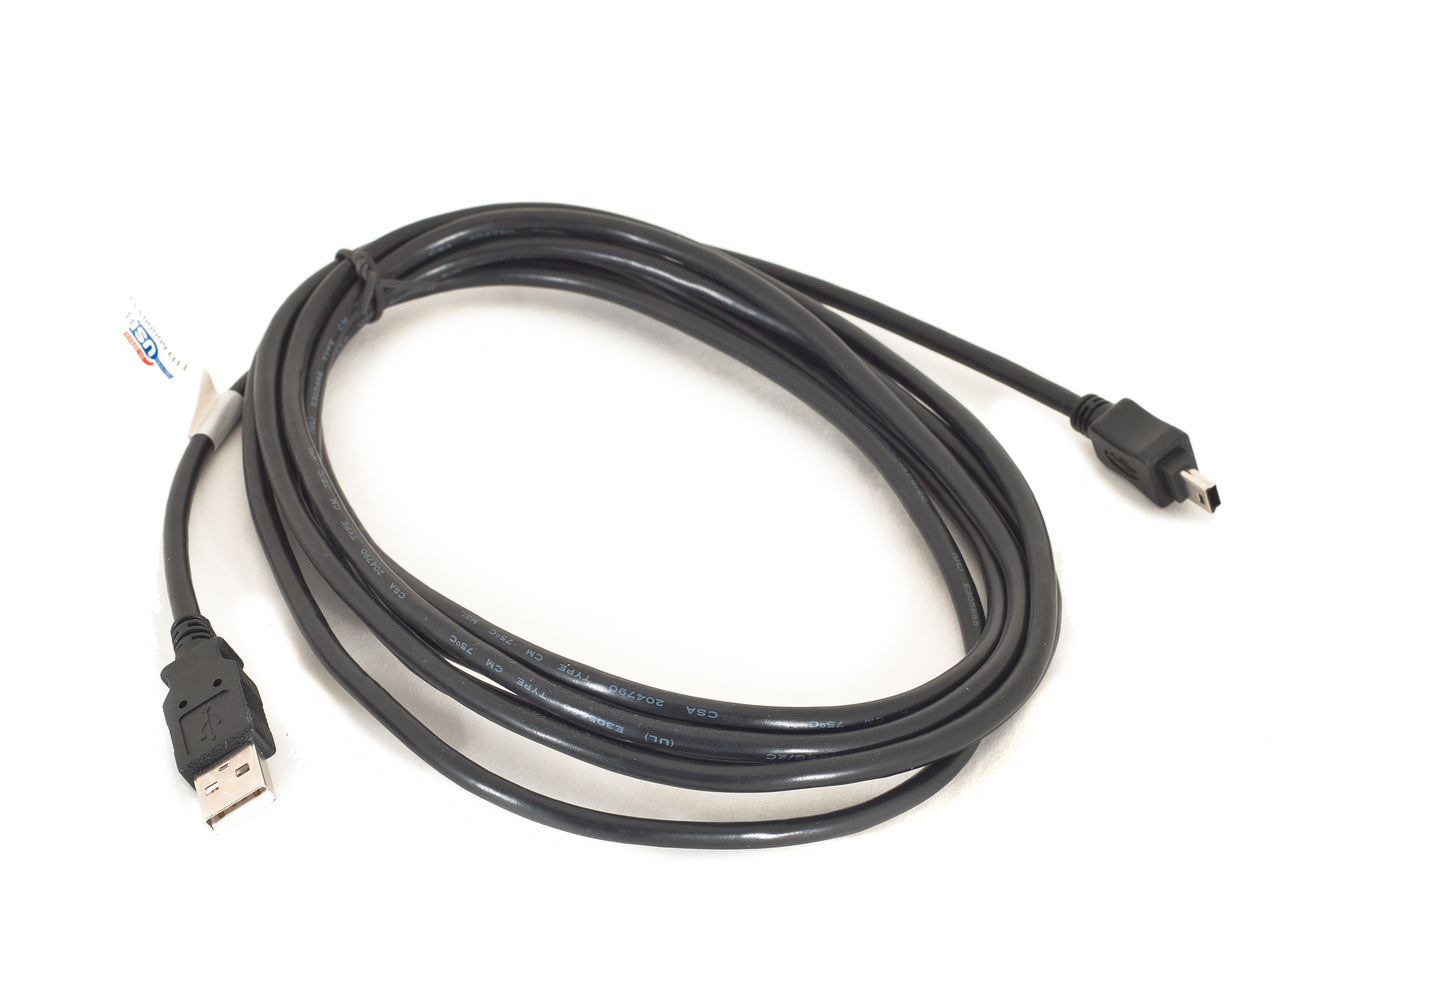 USB Data Transfer Cable XR-3